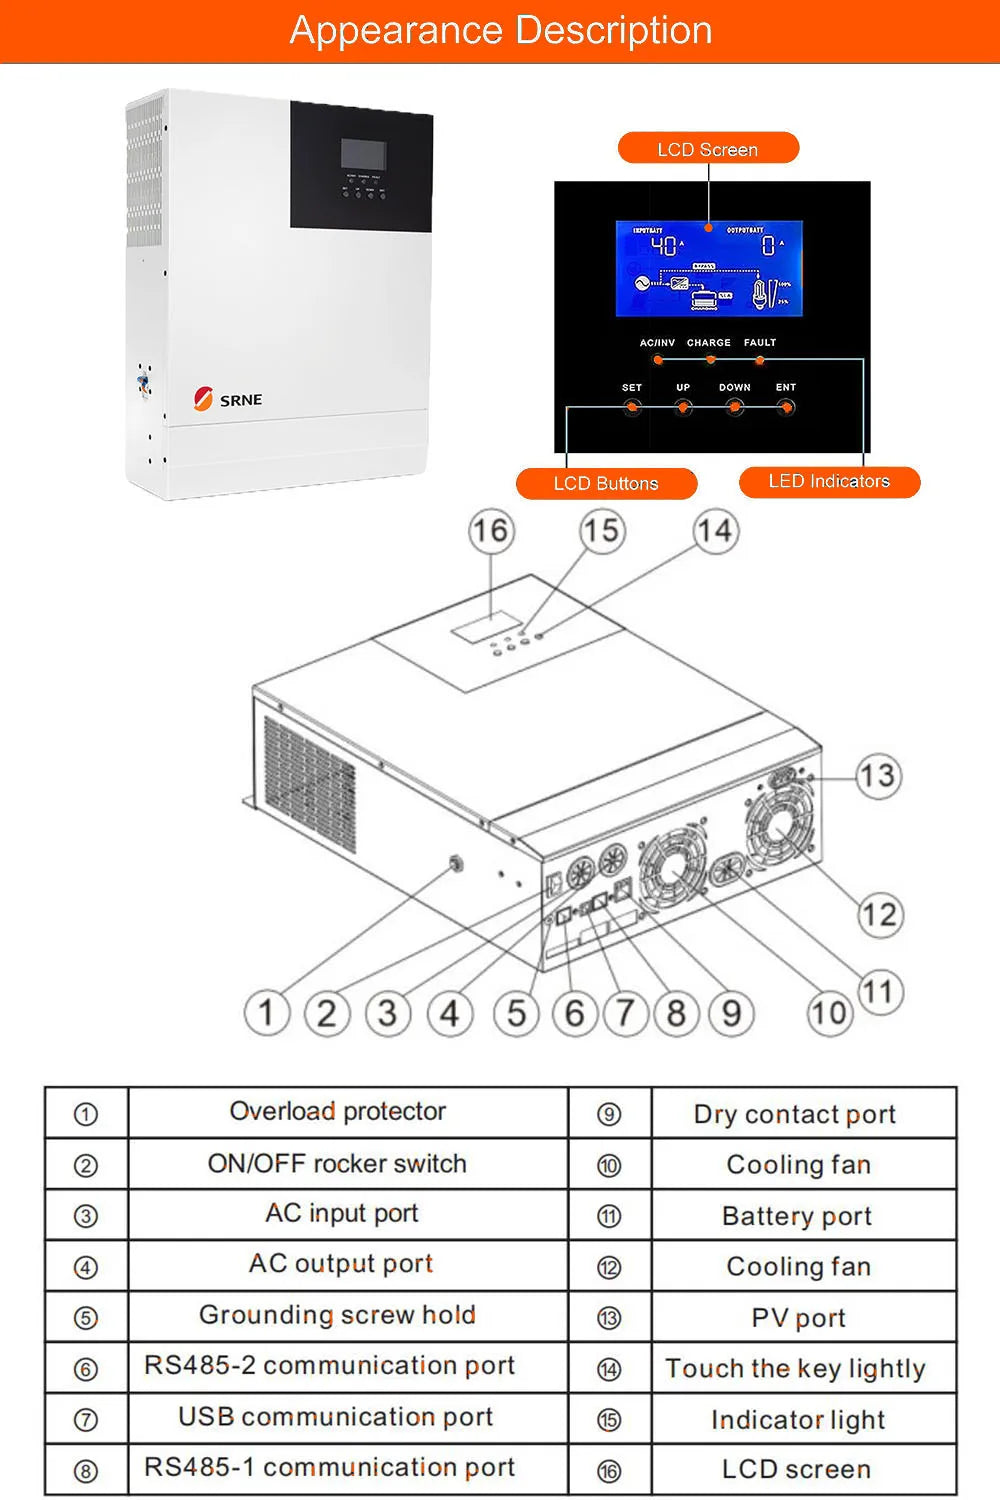 SRNE 5000W 48V Hybrid Inversor, High-performance solar inverter with built-in charger and Wi-Fi connectivity for efficient energy harvesting and storage.